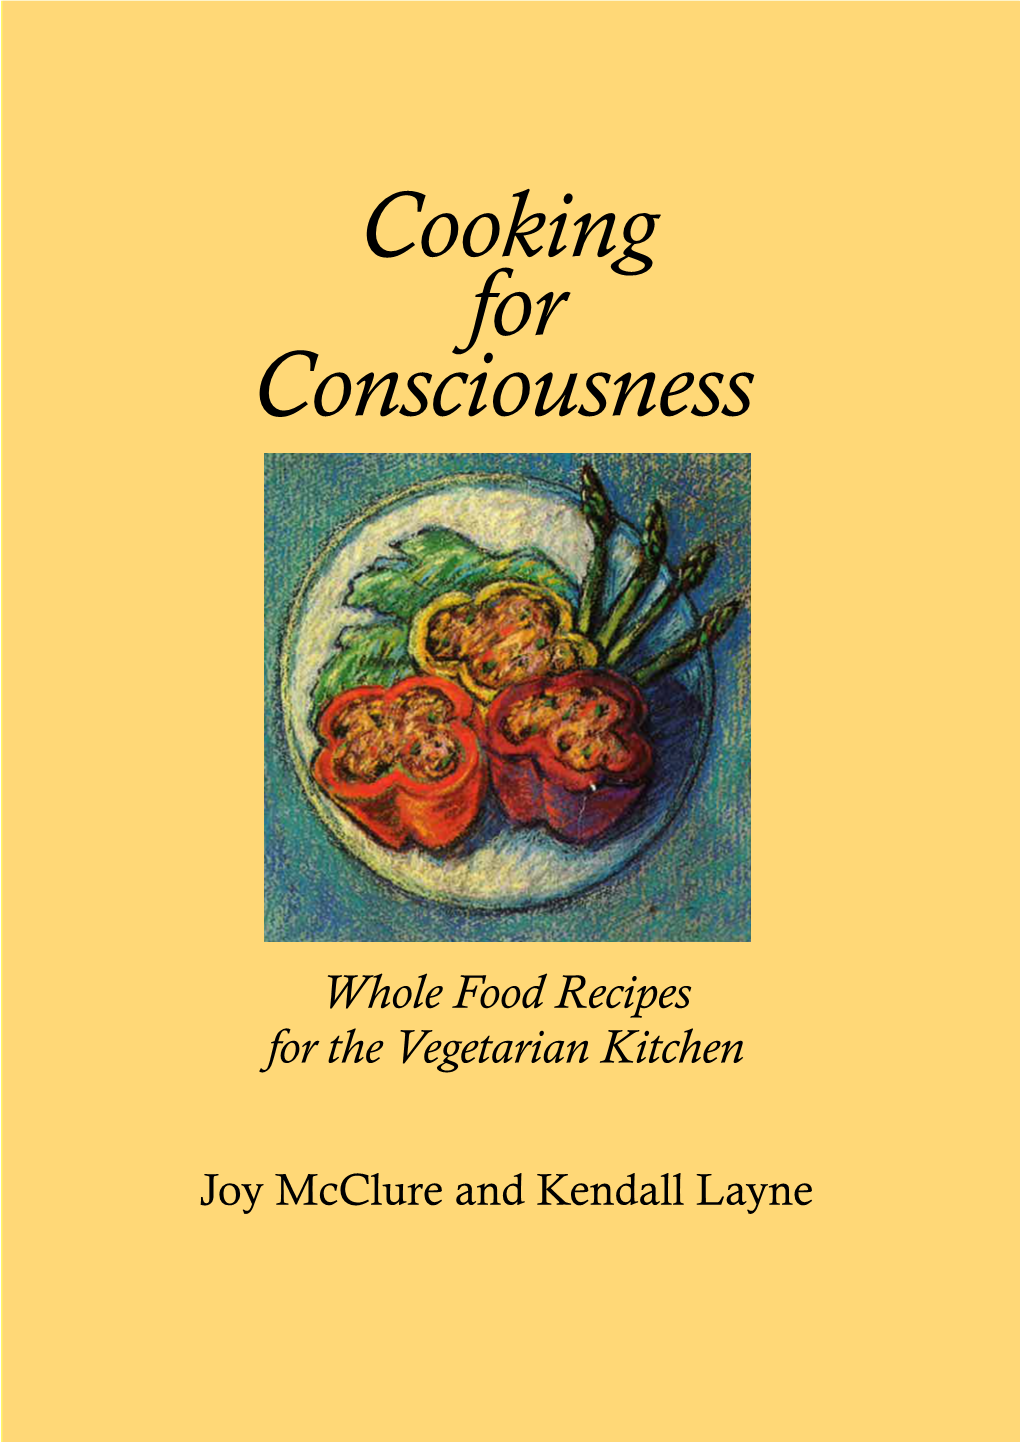 Cooking for Consciousness